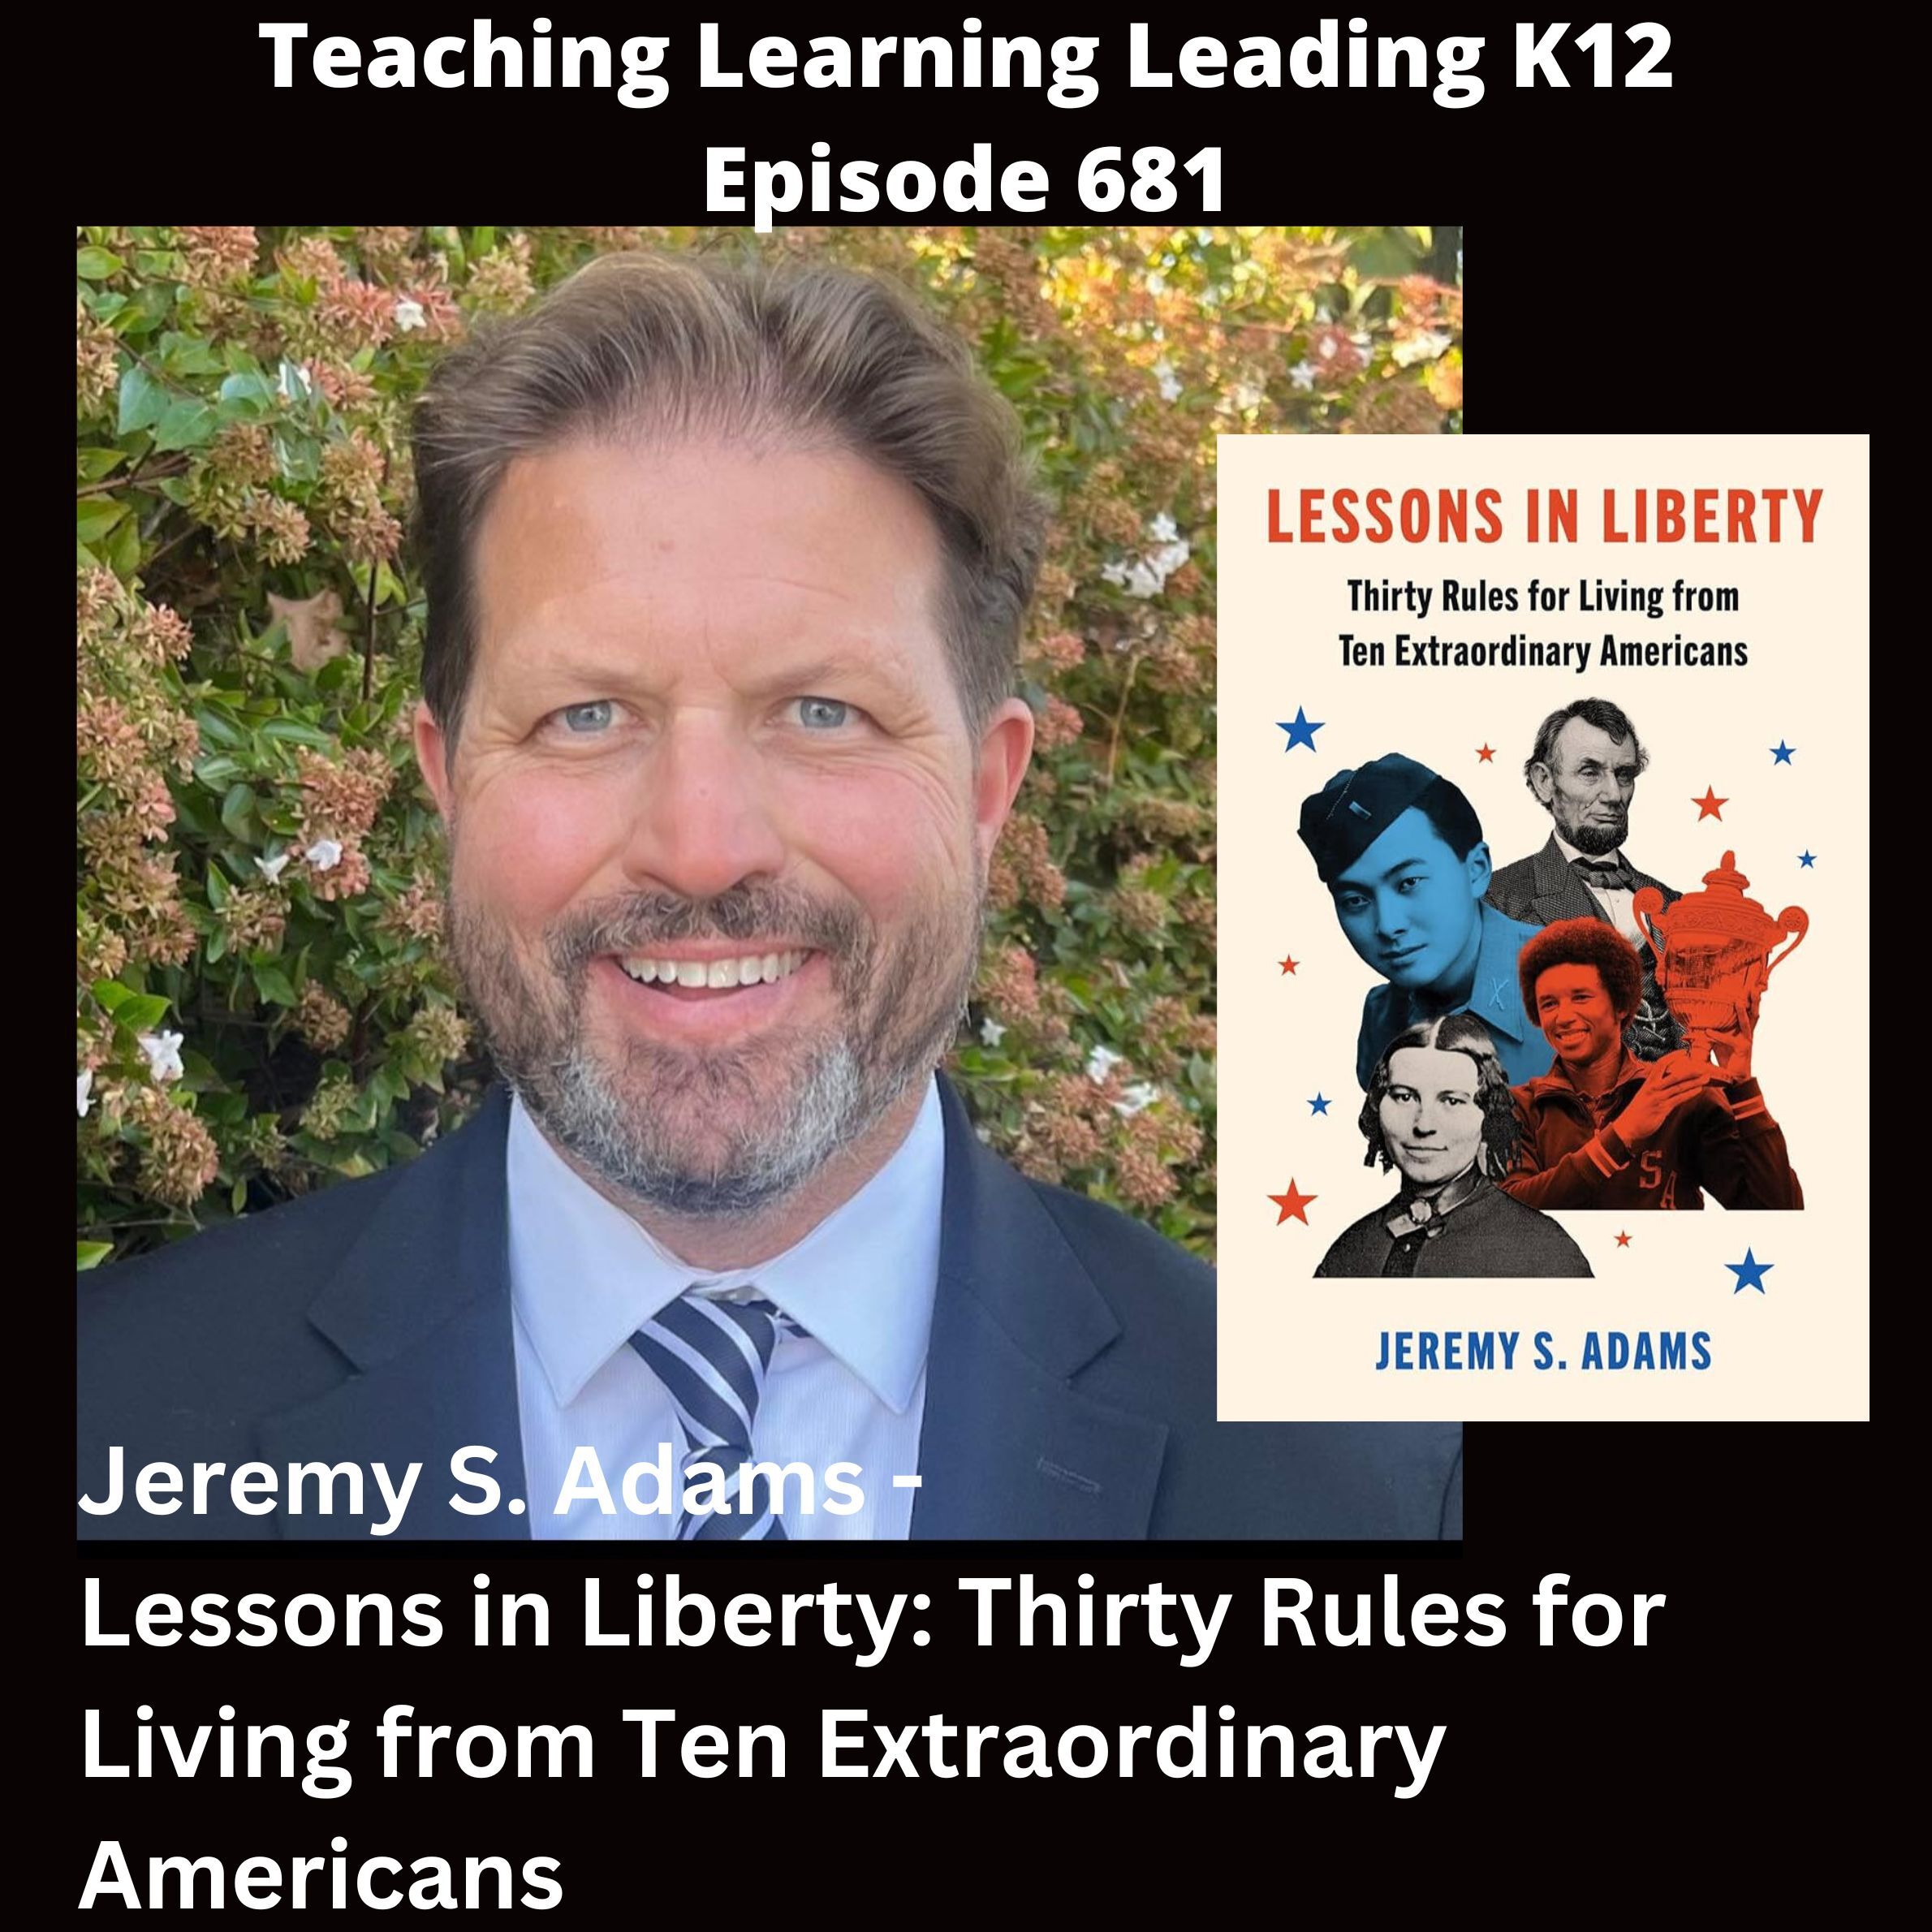 Jeremy S. Adams - Lessons in Liberty: Thirty Rules for Living from Ten Extraordinary Americans - 681